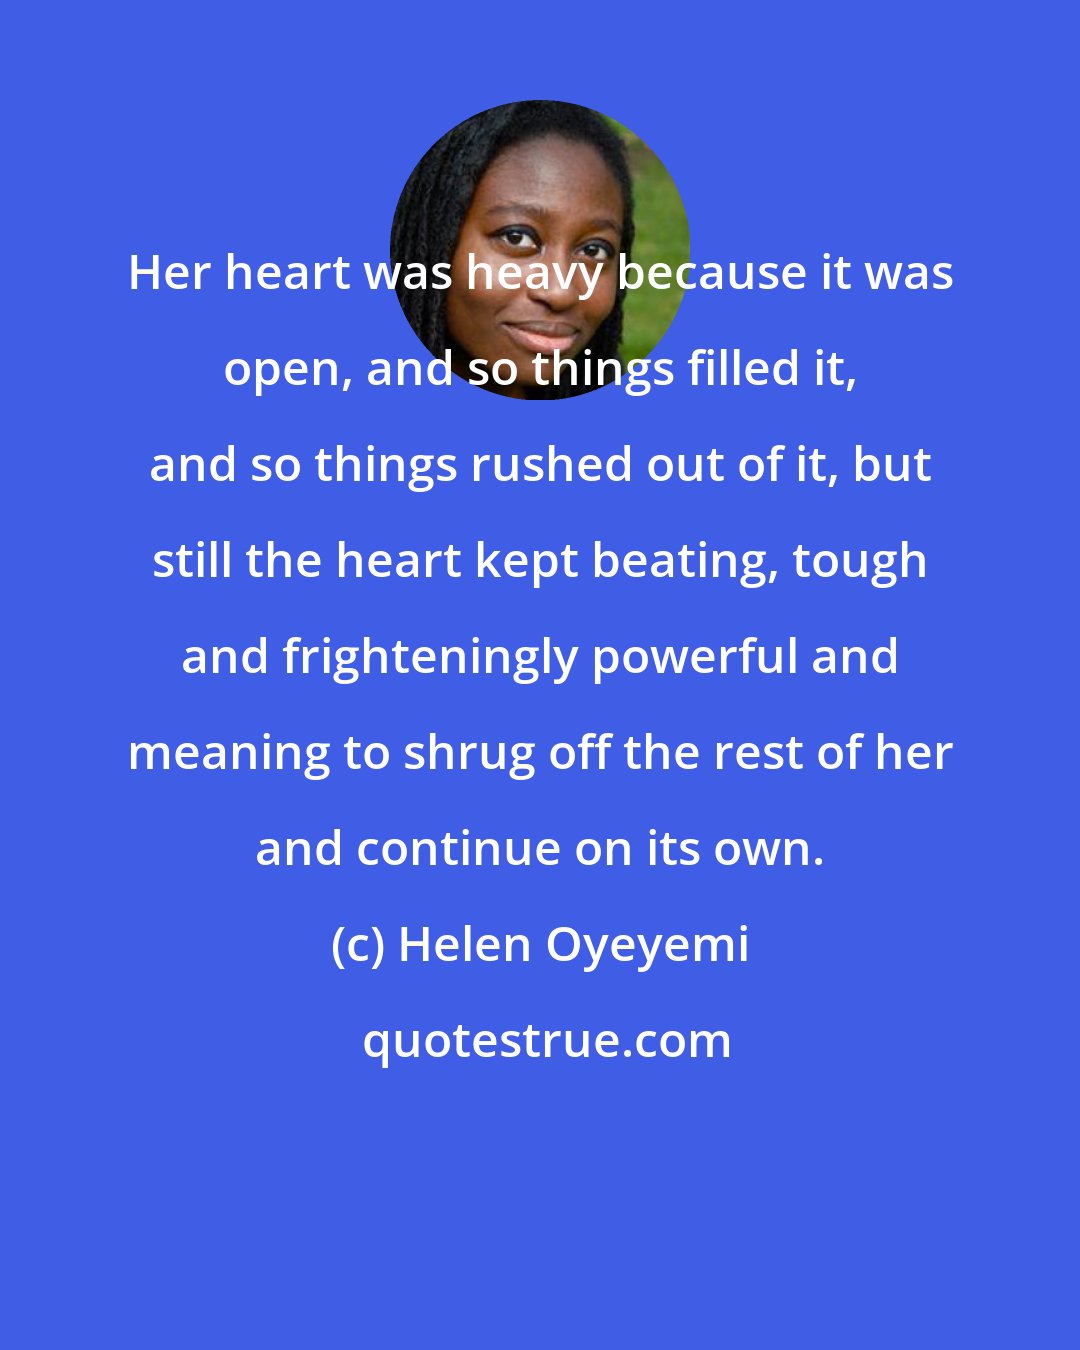 Helen Oyeyemi: Her heart was heavy because it was open, and so things filled it, and so things rushed out of it, but still the heart kept beating, tough and frighteningly powerful and meaning to shrug off the rest of her and continue on its own.